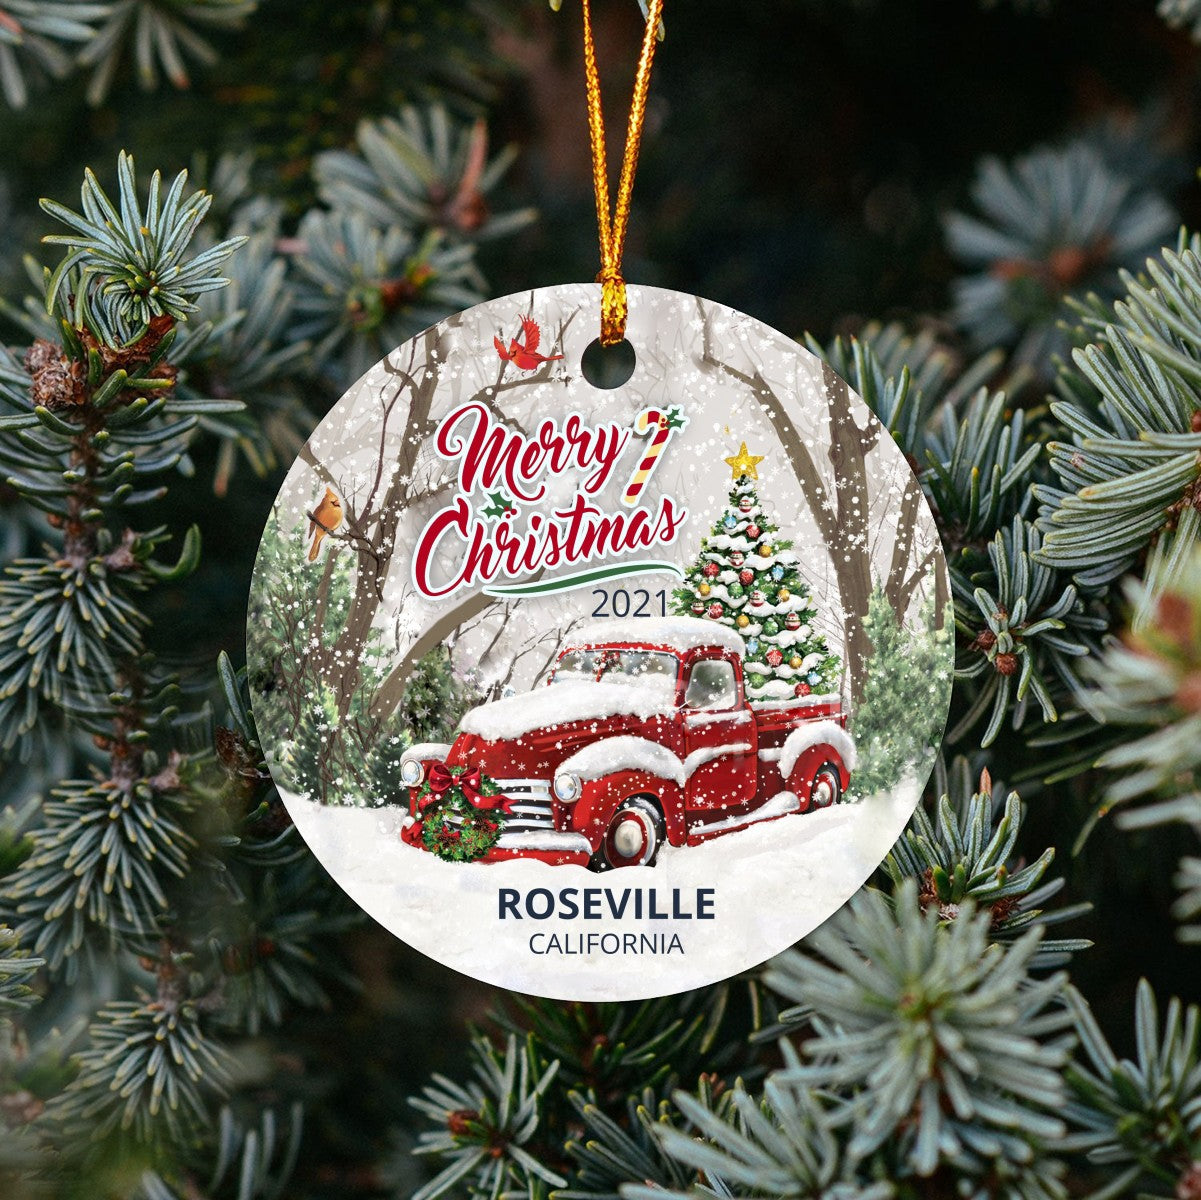 Christmas Tree Ornaments Roseville - Ornament Customize With Name City And State Roseville California CA - Red Truck Xmas Ornaments 3'' Plastic Gift For Family, Friend And Housewarming